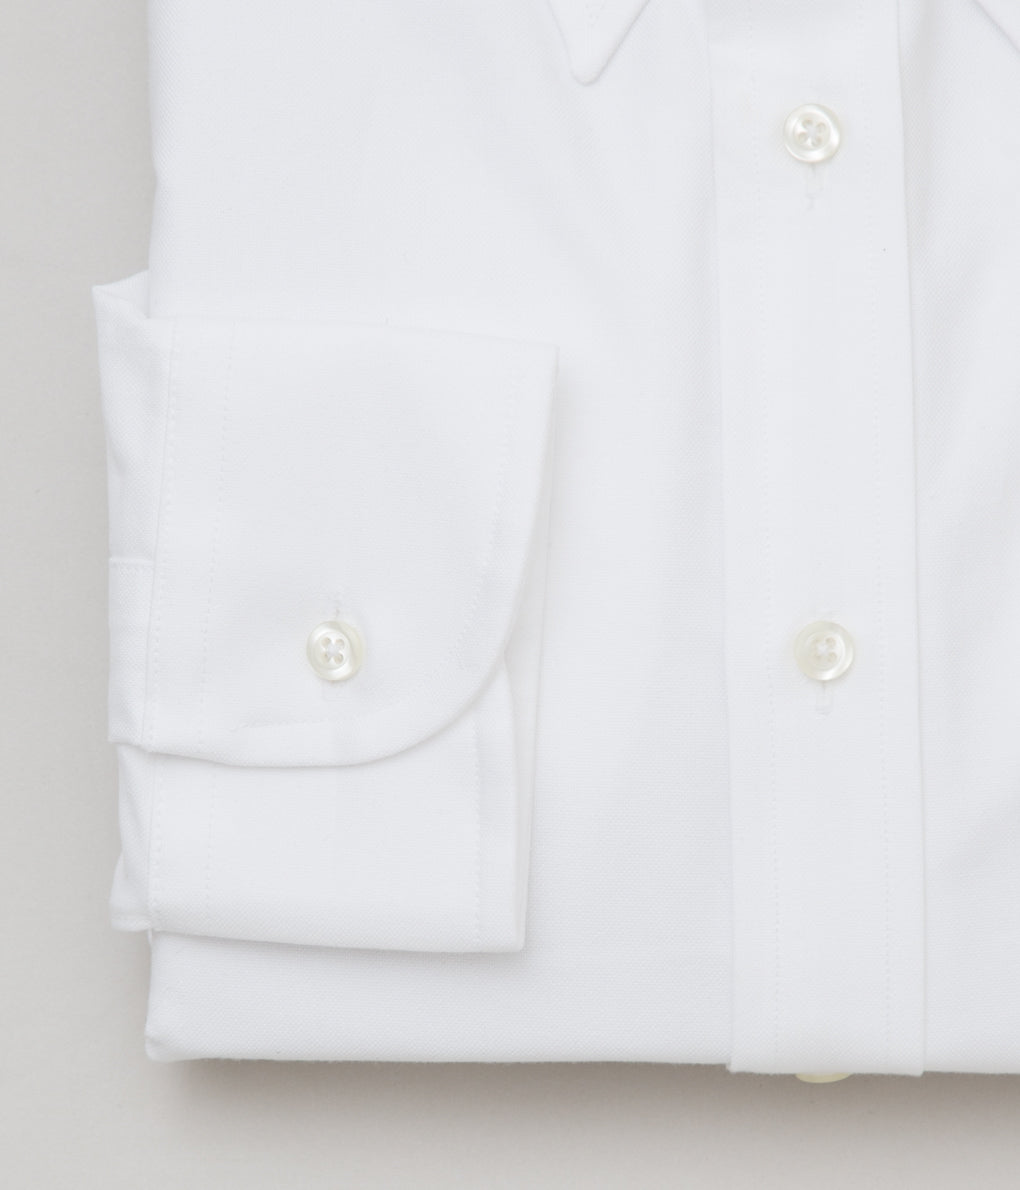 INDIVIDUALIZED SHIRTS "CAMBRIDGE OXFORD HERITAGE COLLECTION TAB COLLAR SHIRT (WHITE)"